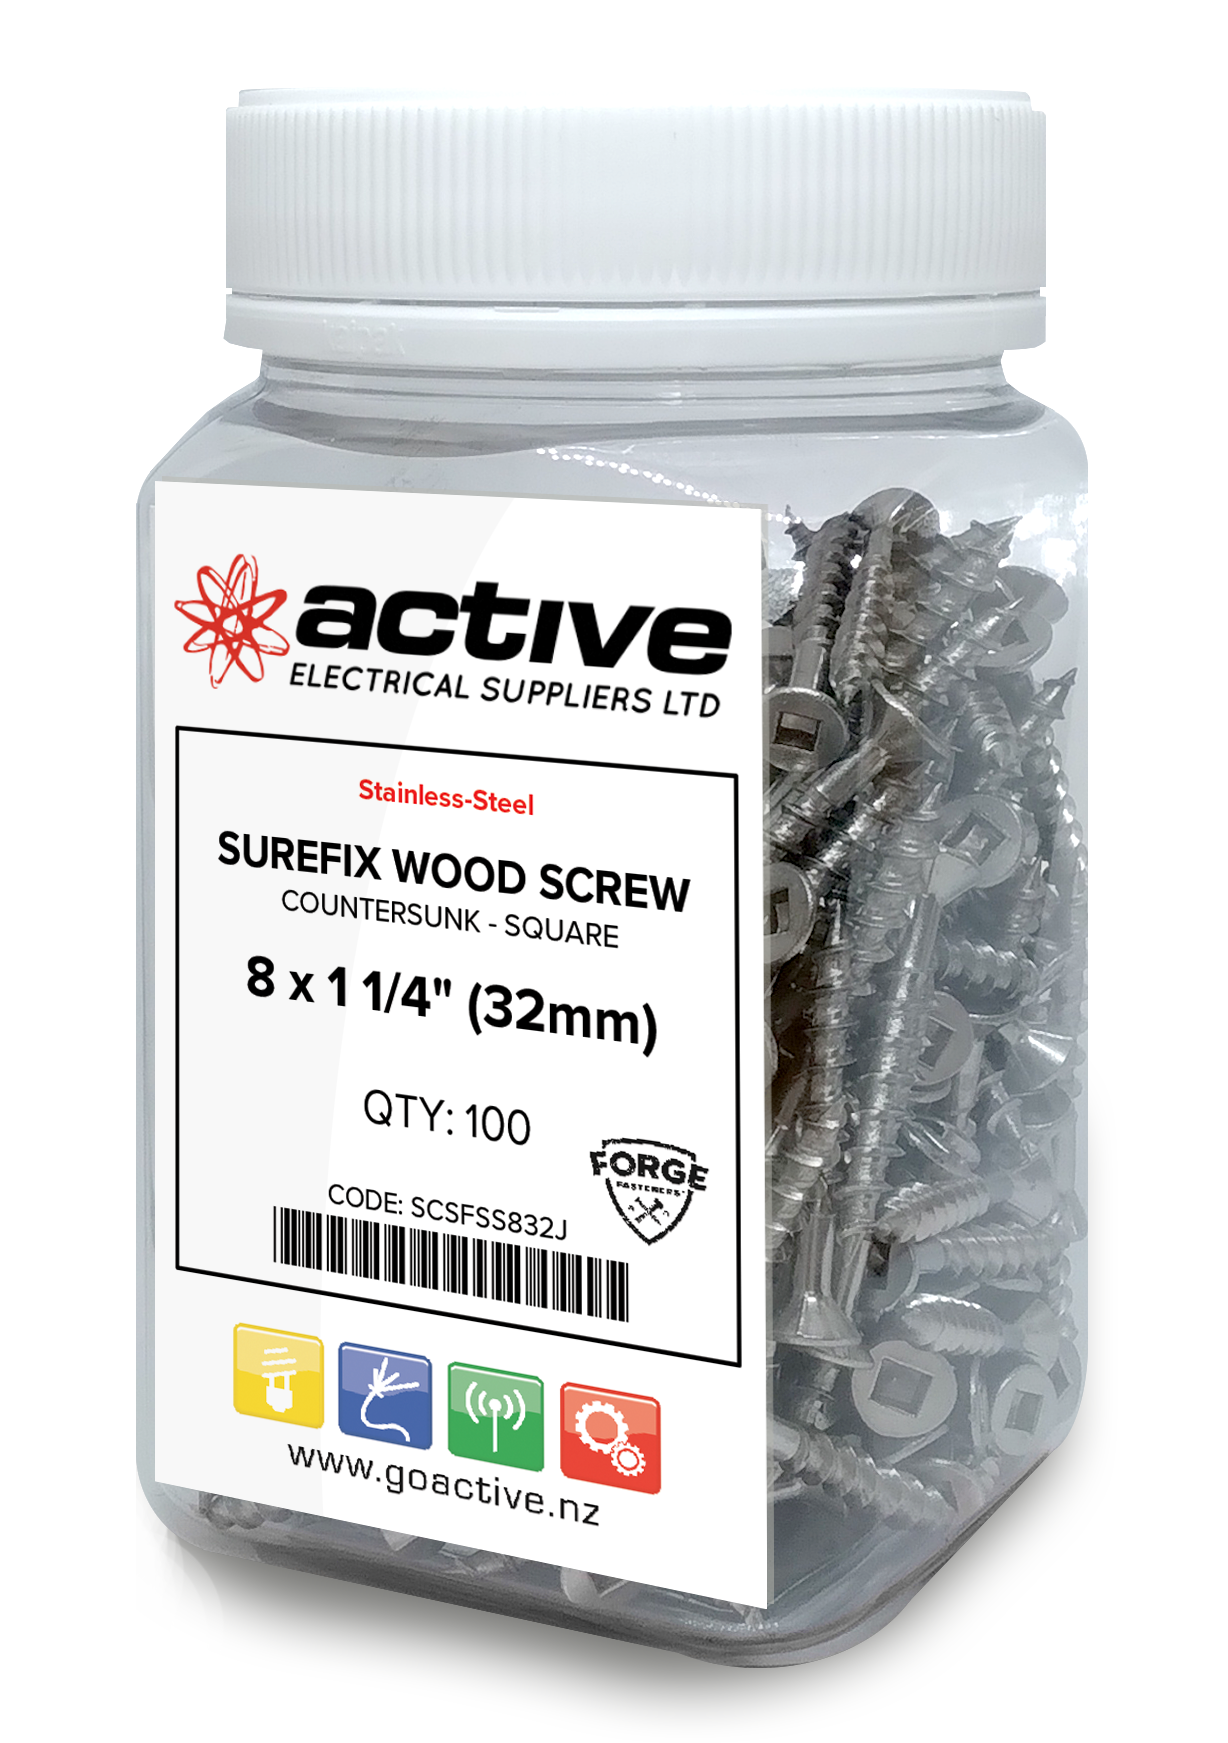 Wood Screw Square Drive Countersunk - Stainless Steel 8 x 1 1/4" (200 Jar)